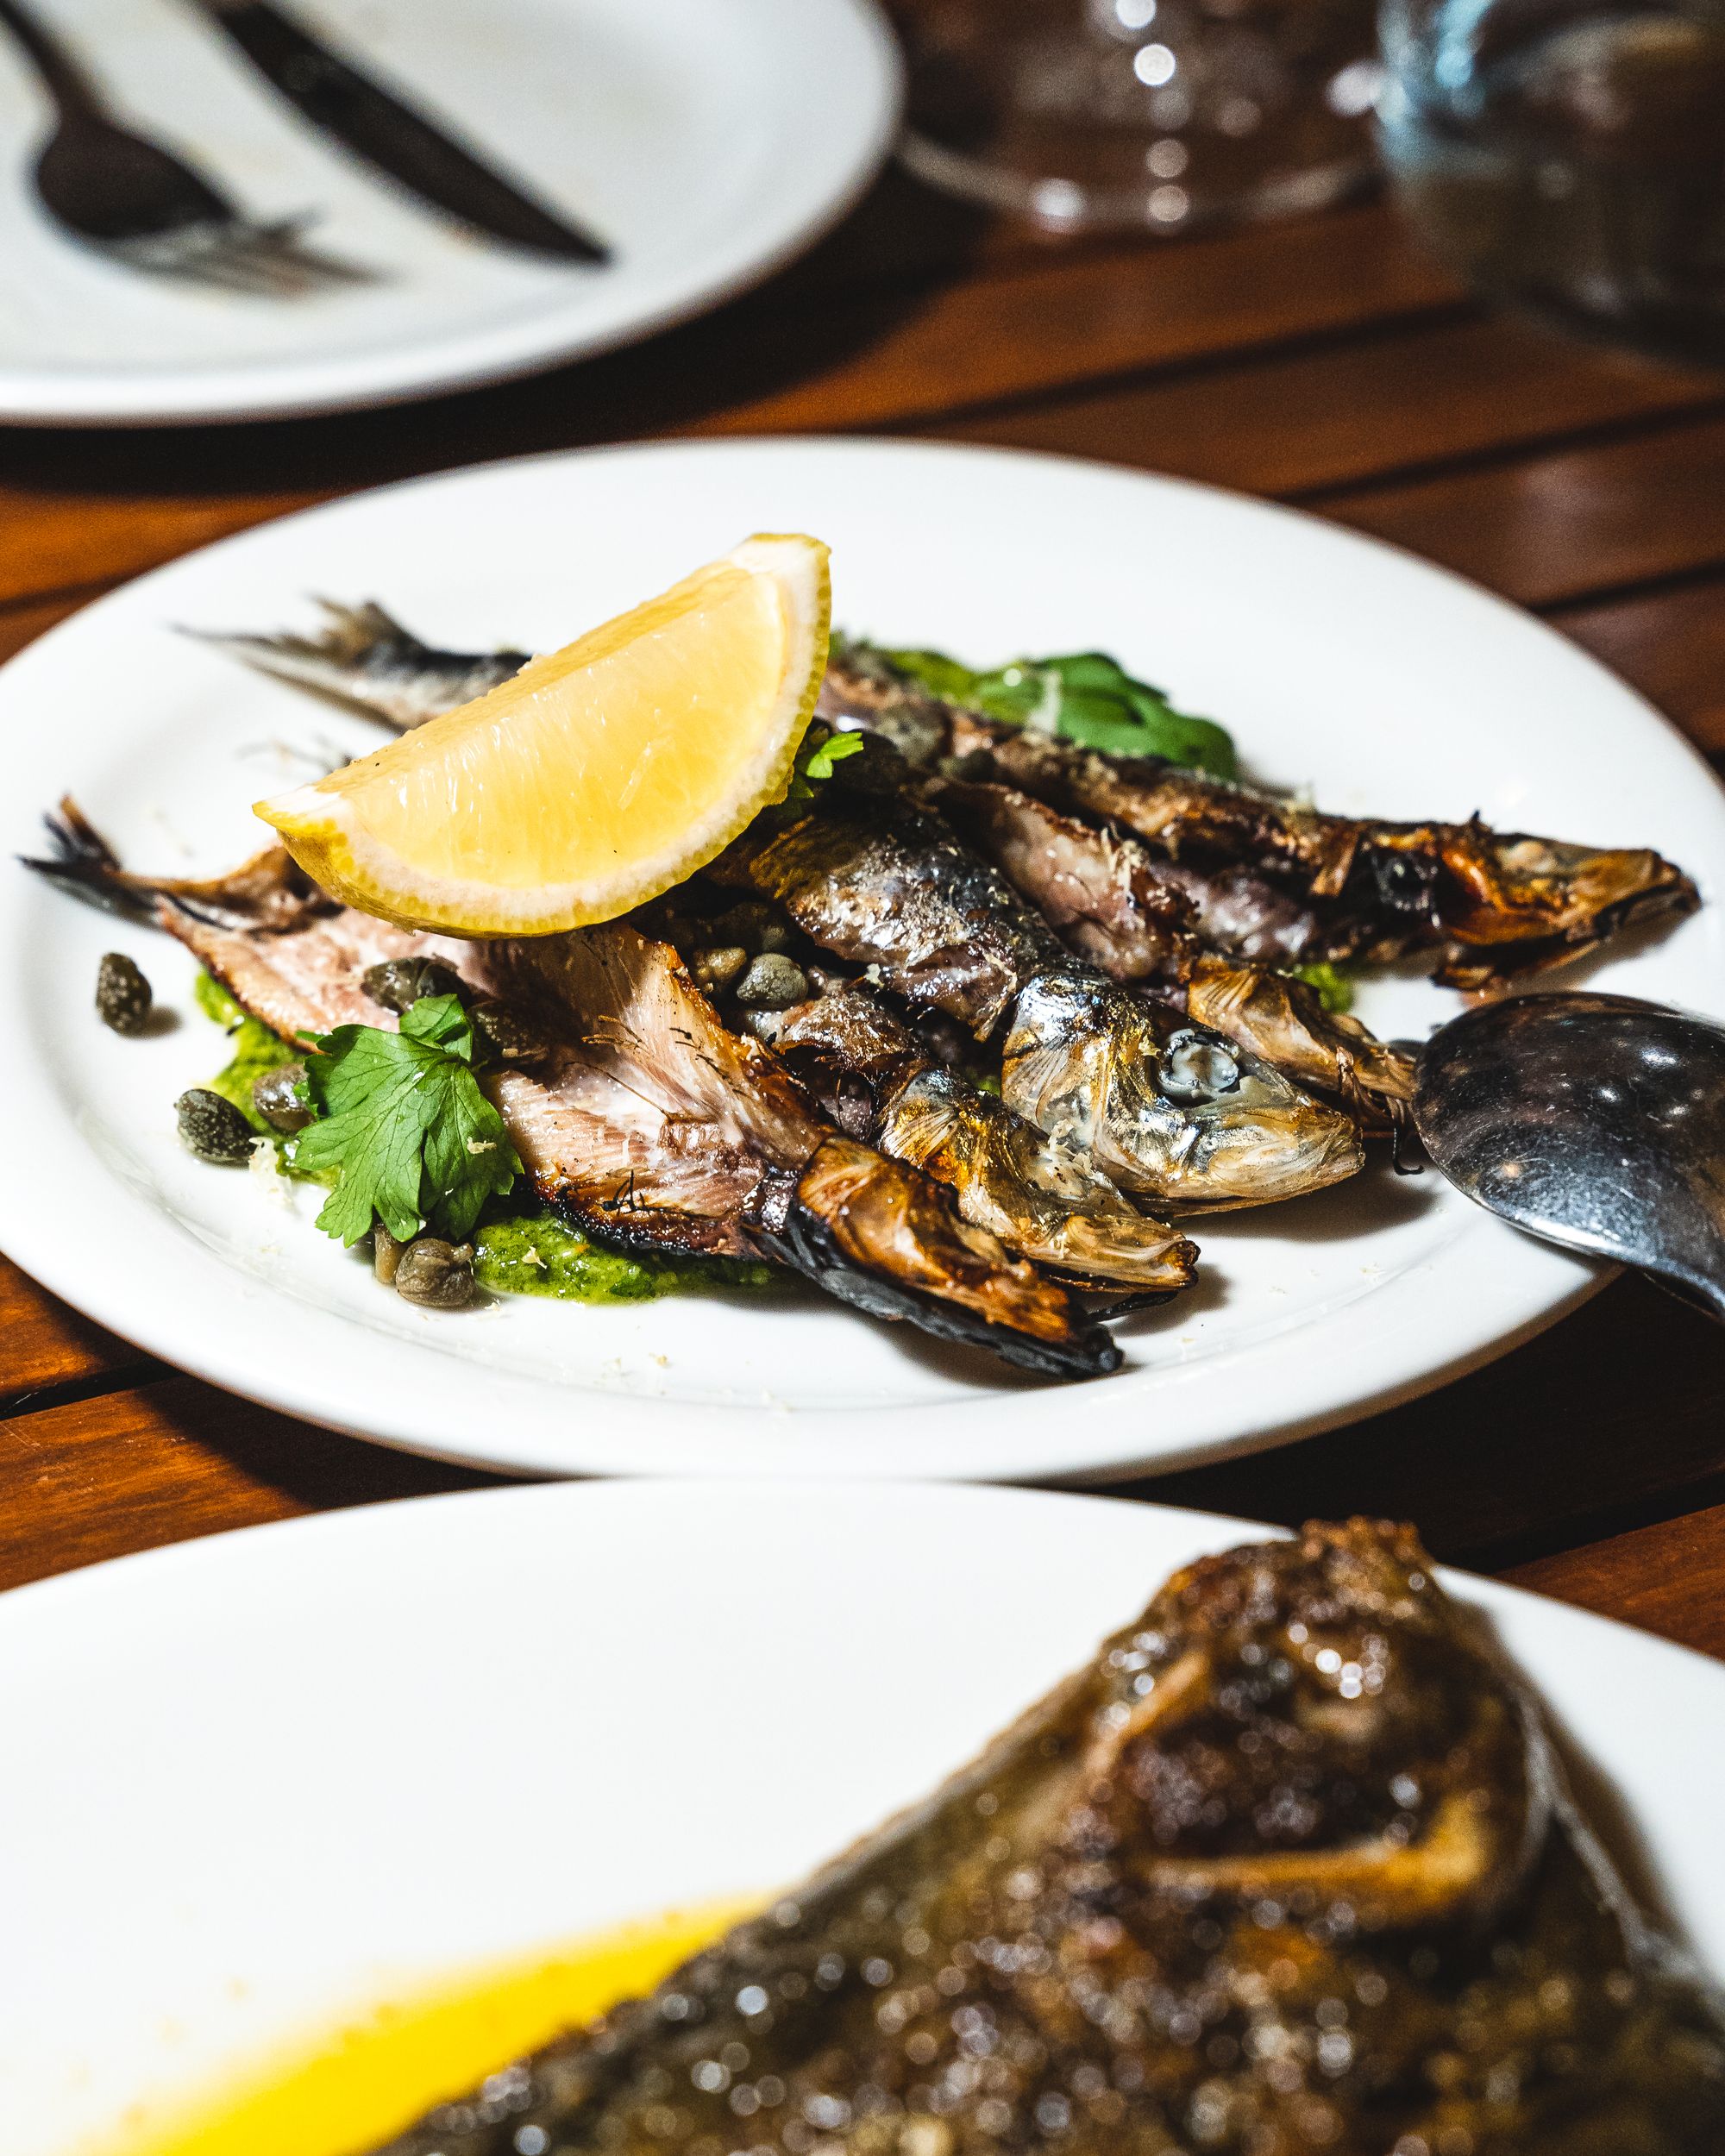 Close up of sardines on a plate, garnished with a lemon wedge and greens